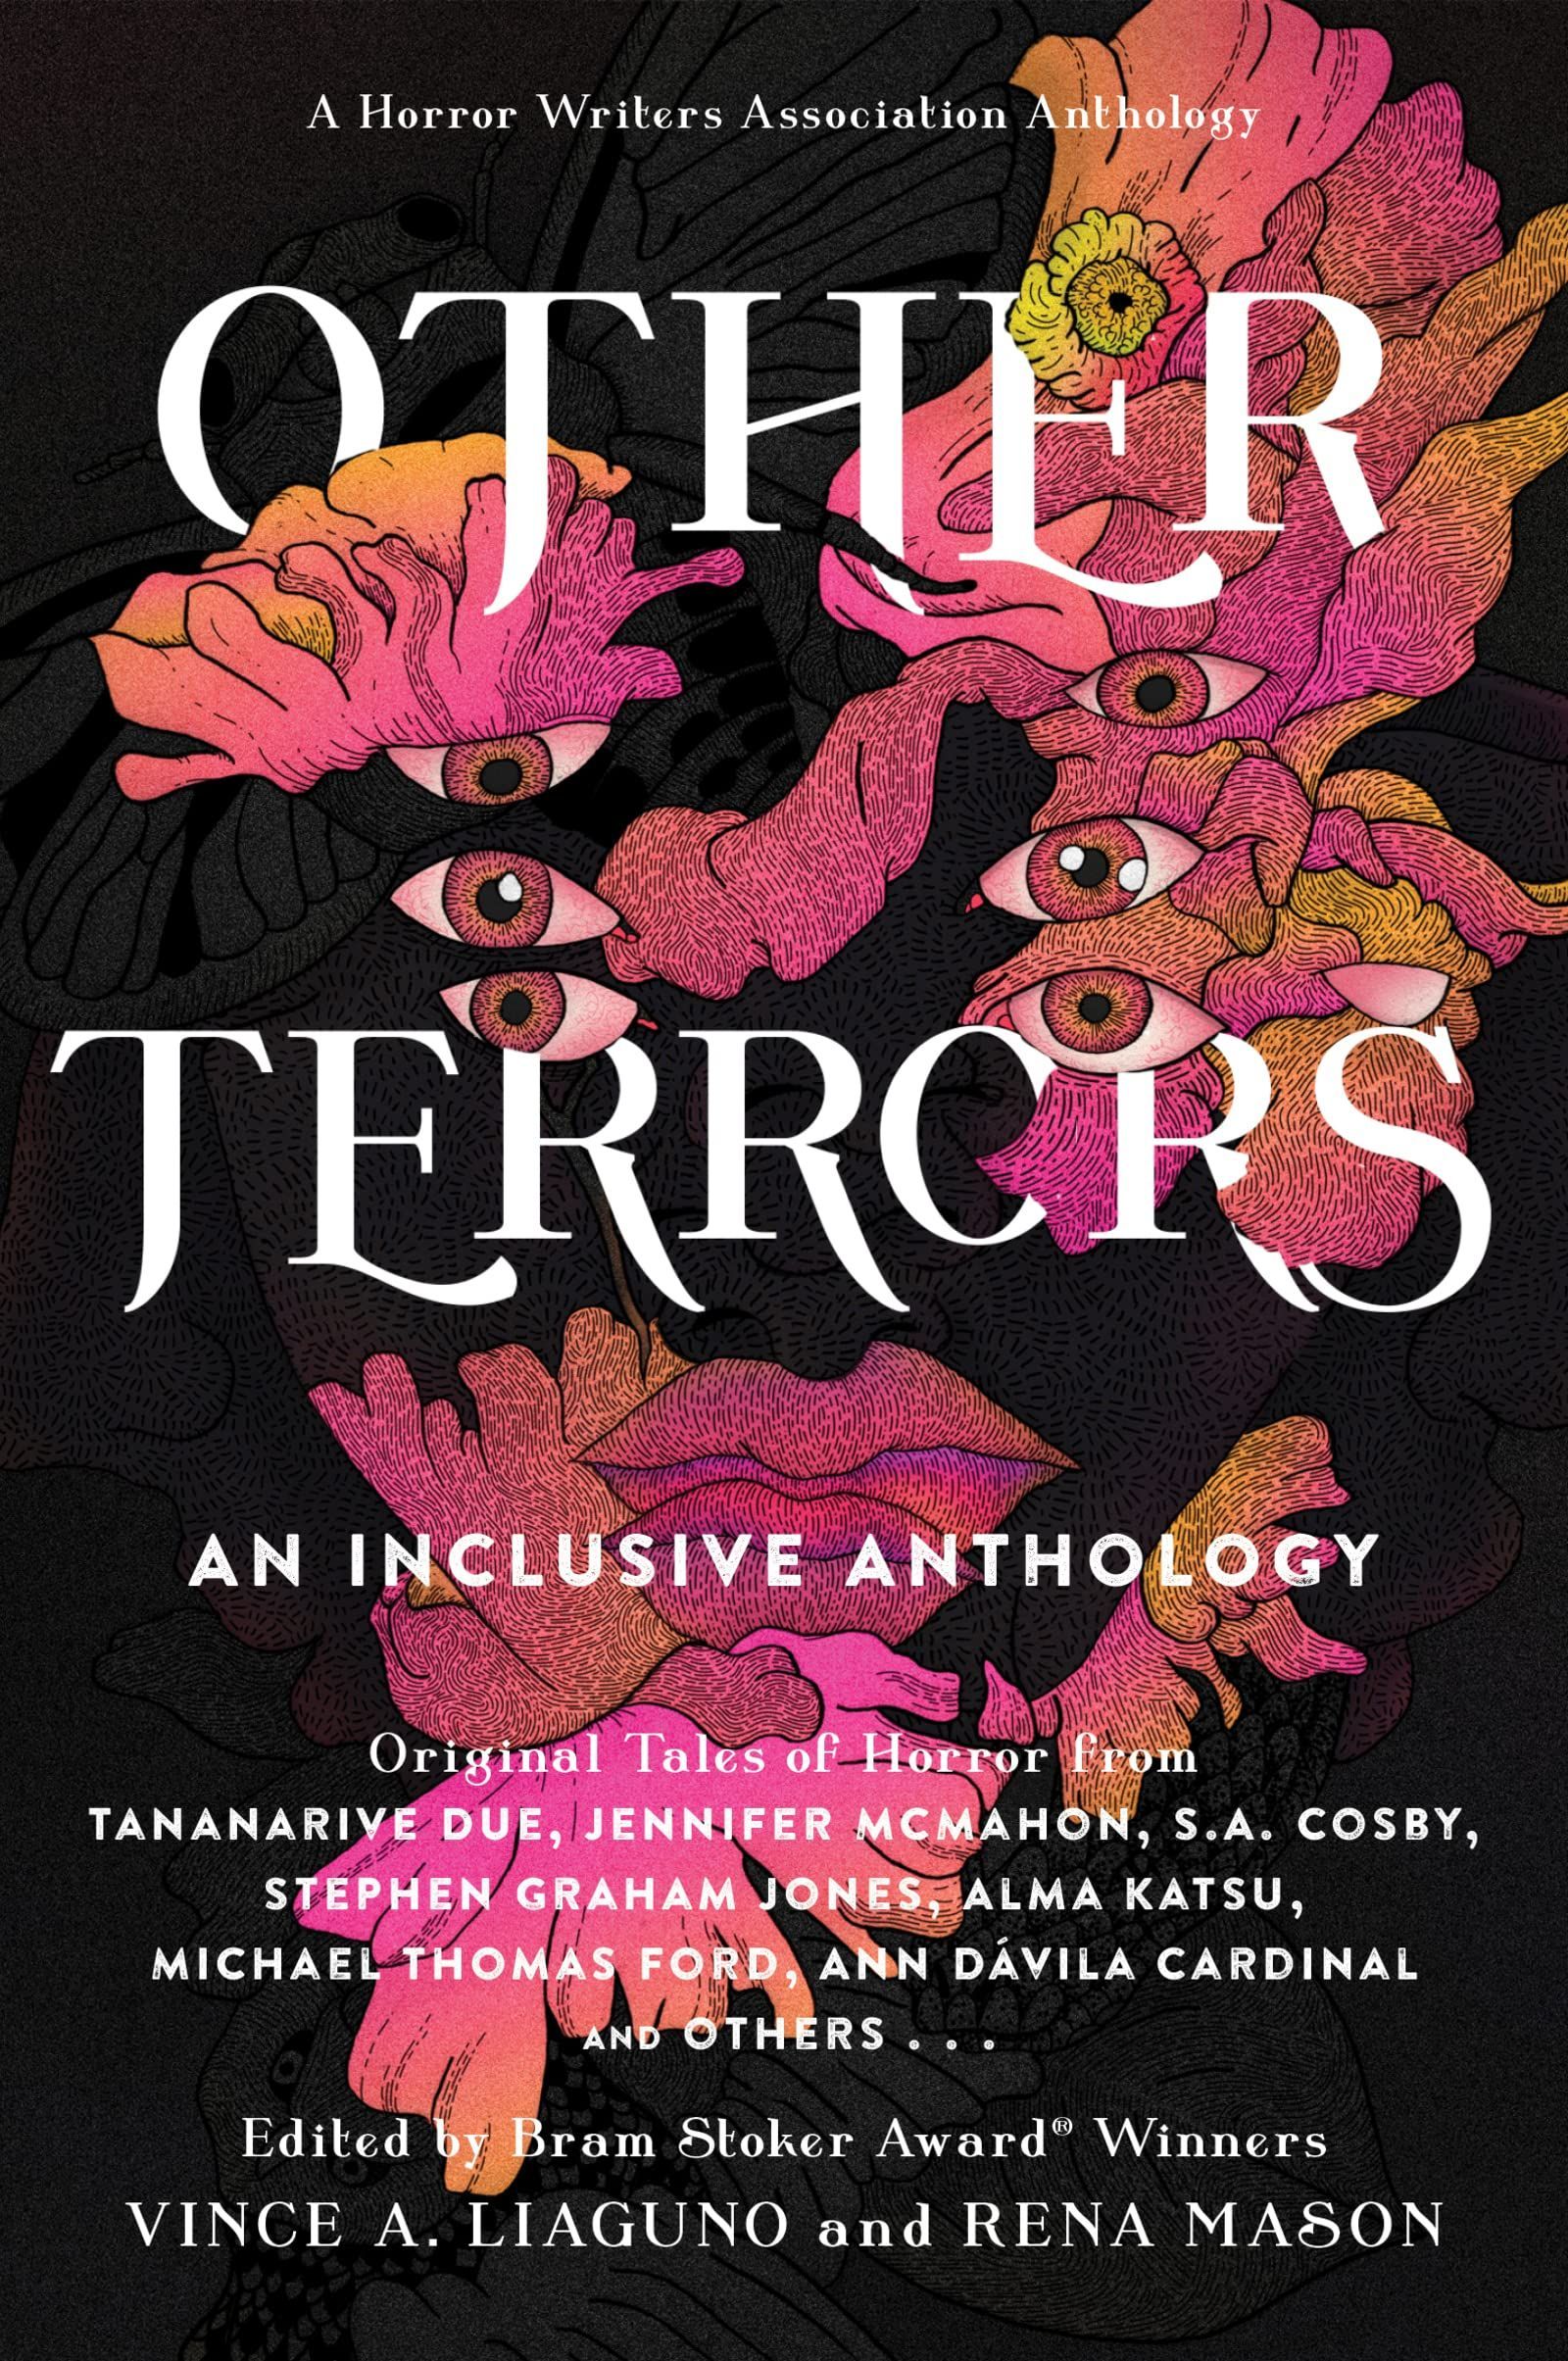 Ghost Stories Aren’t Dead: On the Anthologies “Even in the Grave” and “Other Terrors”